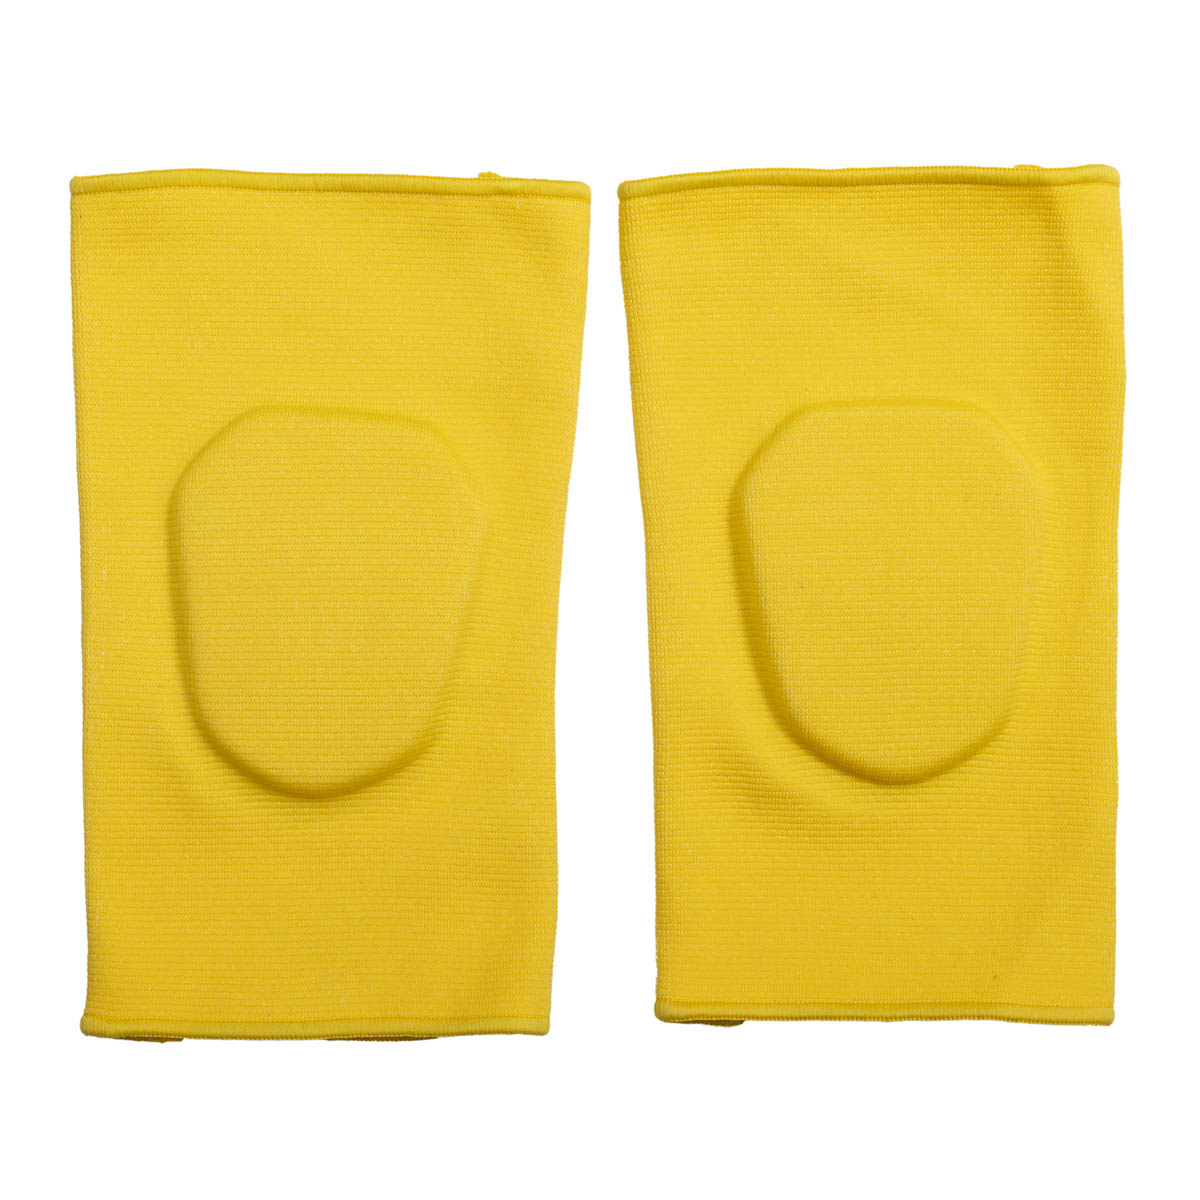 Versatile Knee Pads Multiple Colors for Workout, Rollerblading, Halloween Costumes, and Cosplay Accessories Yellow